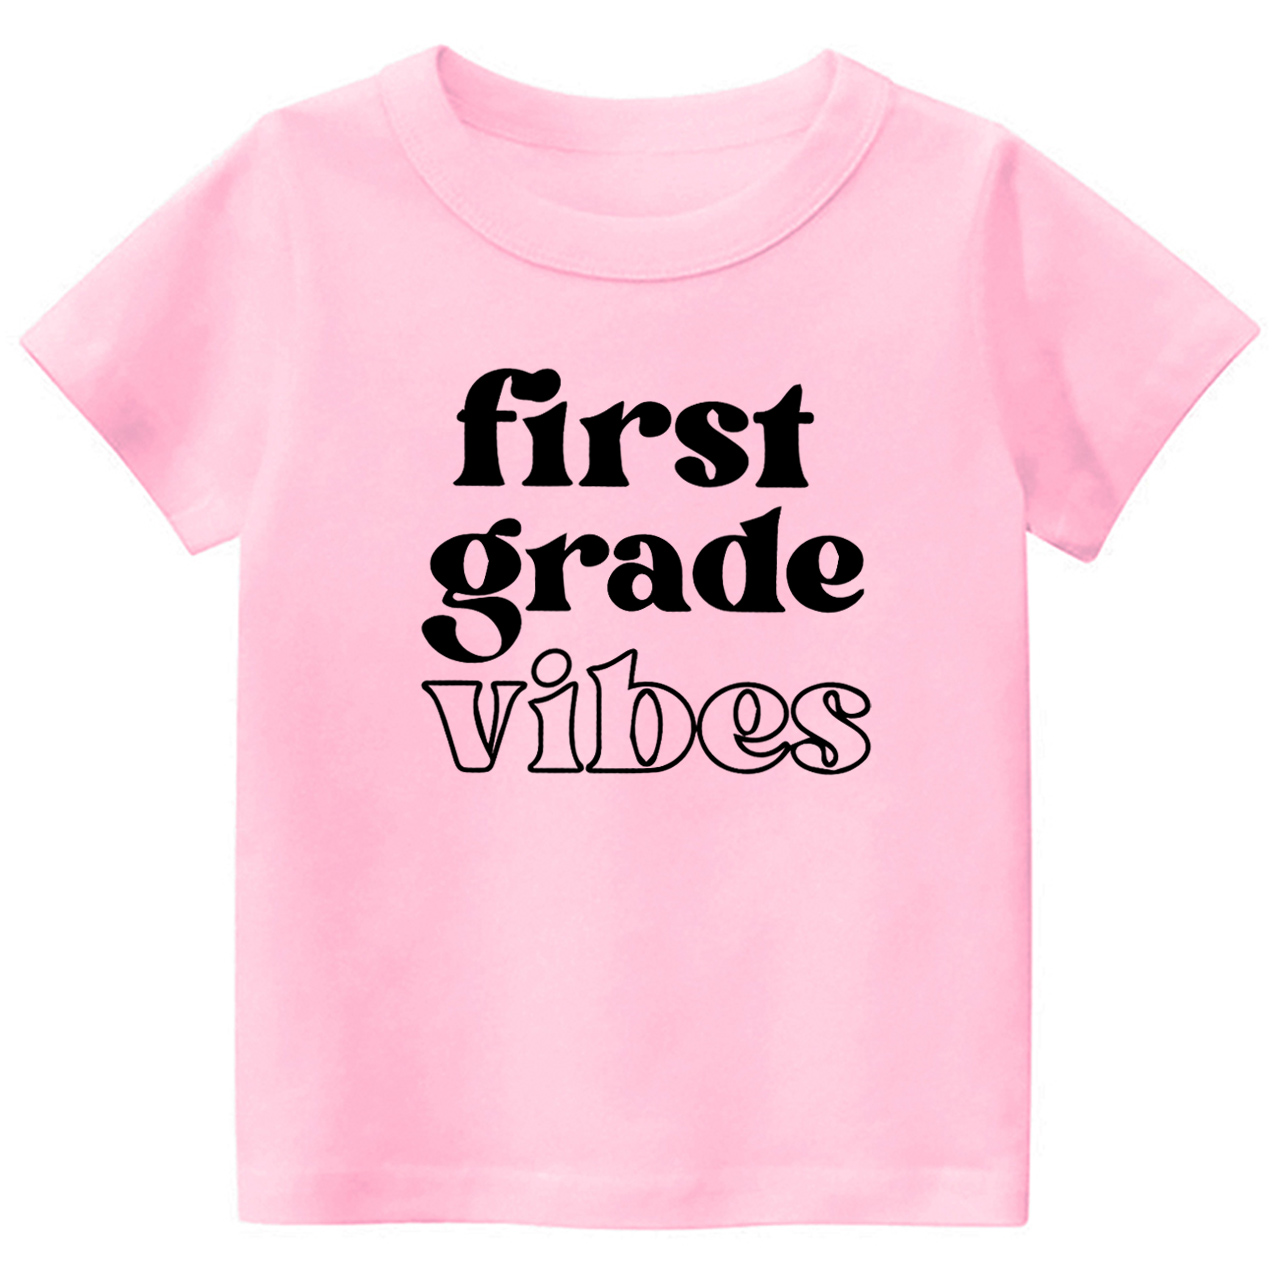 Back To School Vibes Shirt For Boys Or Girls